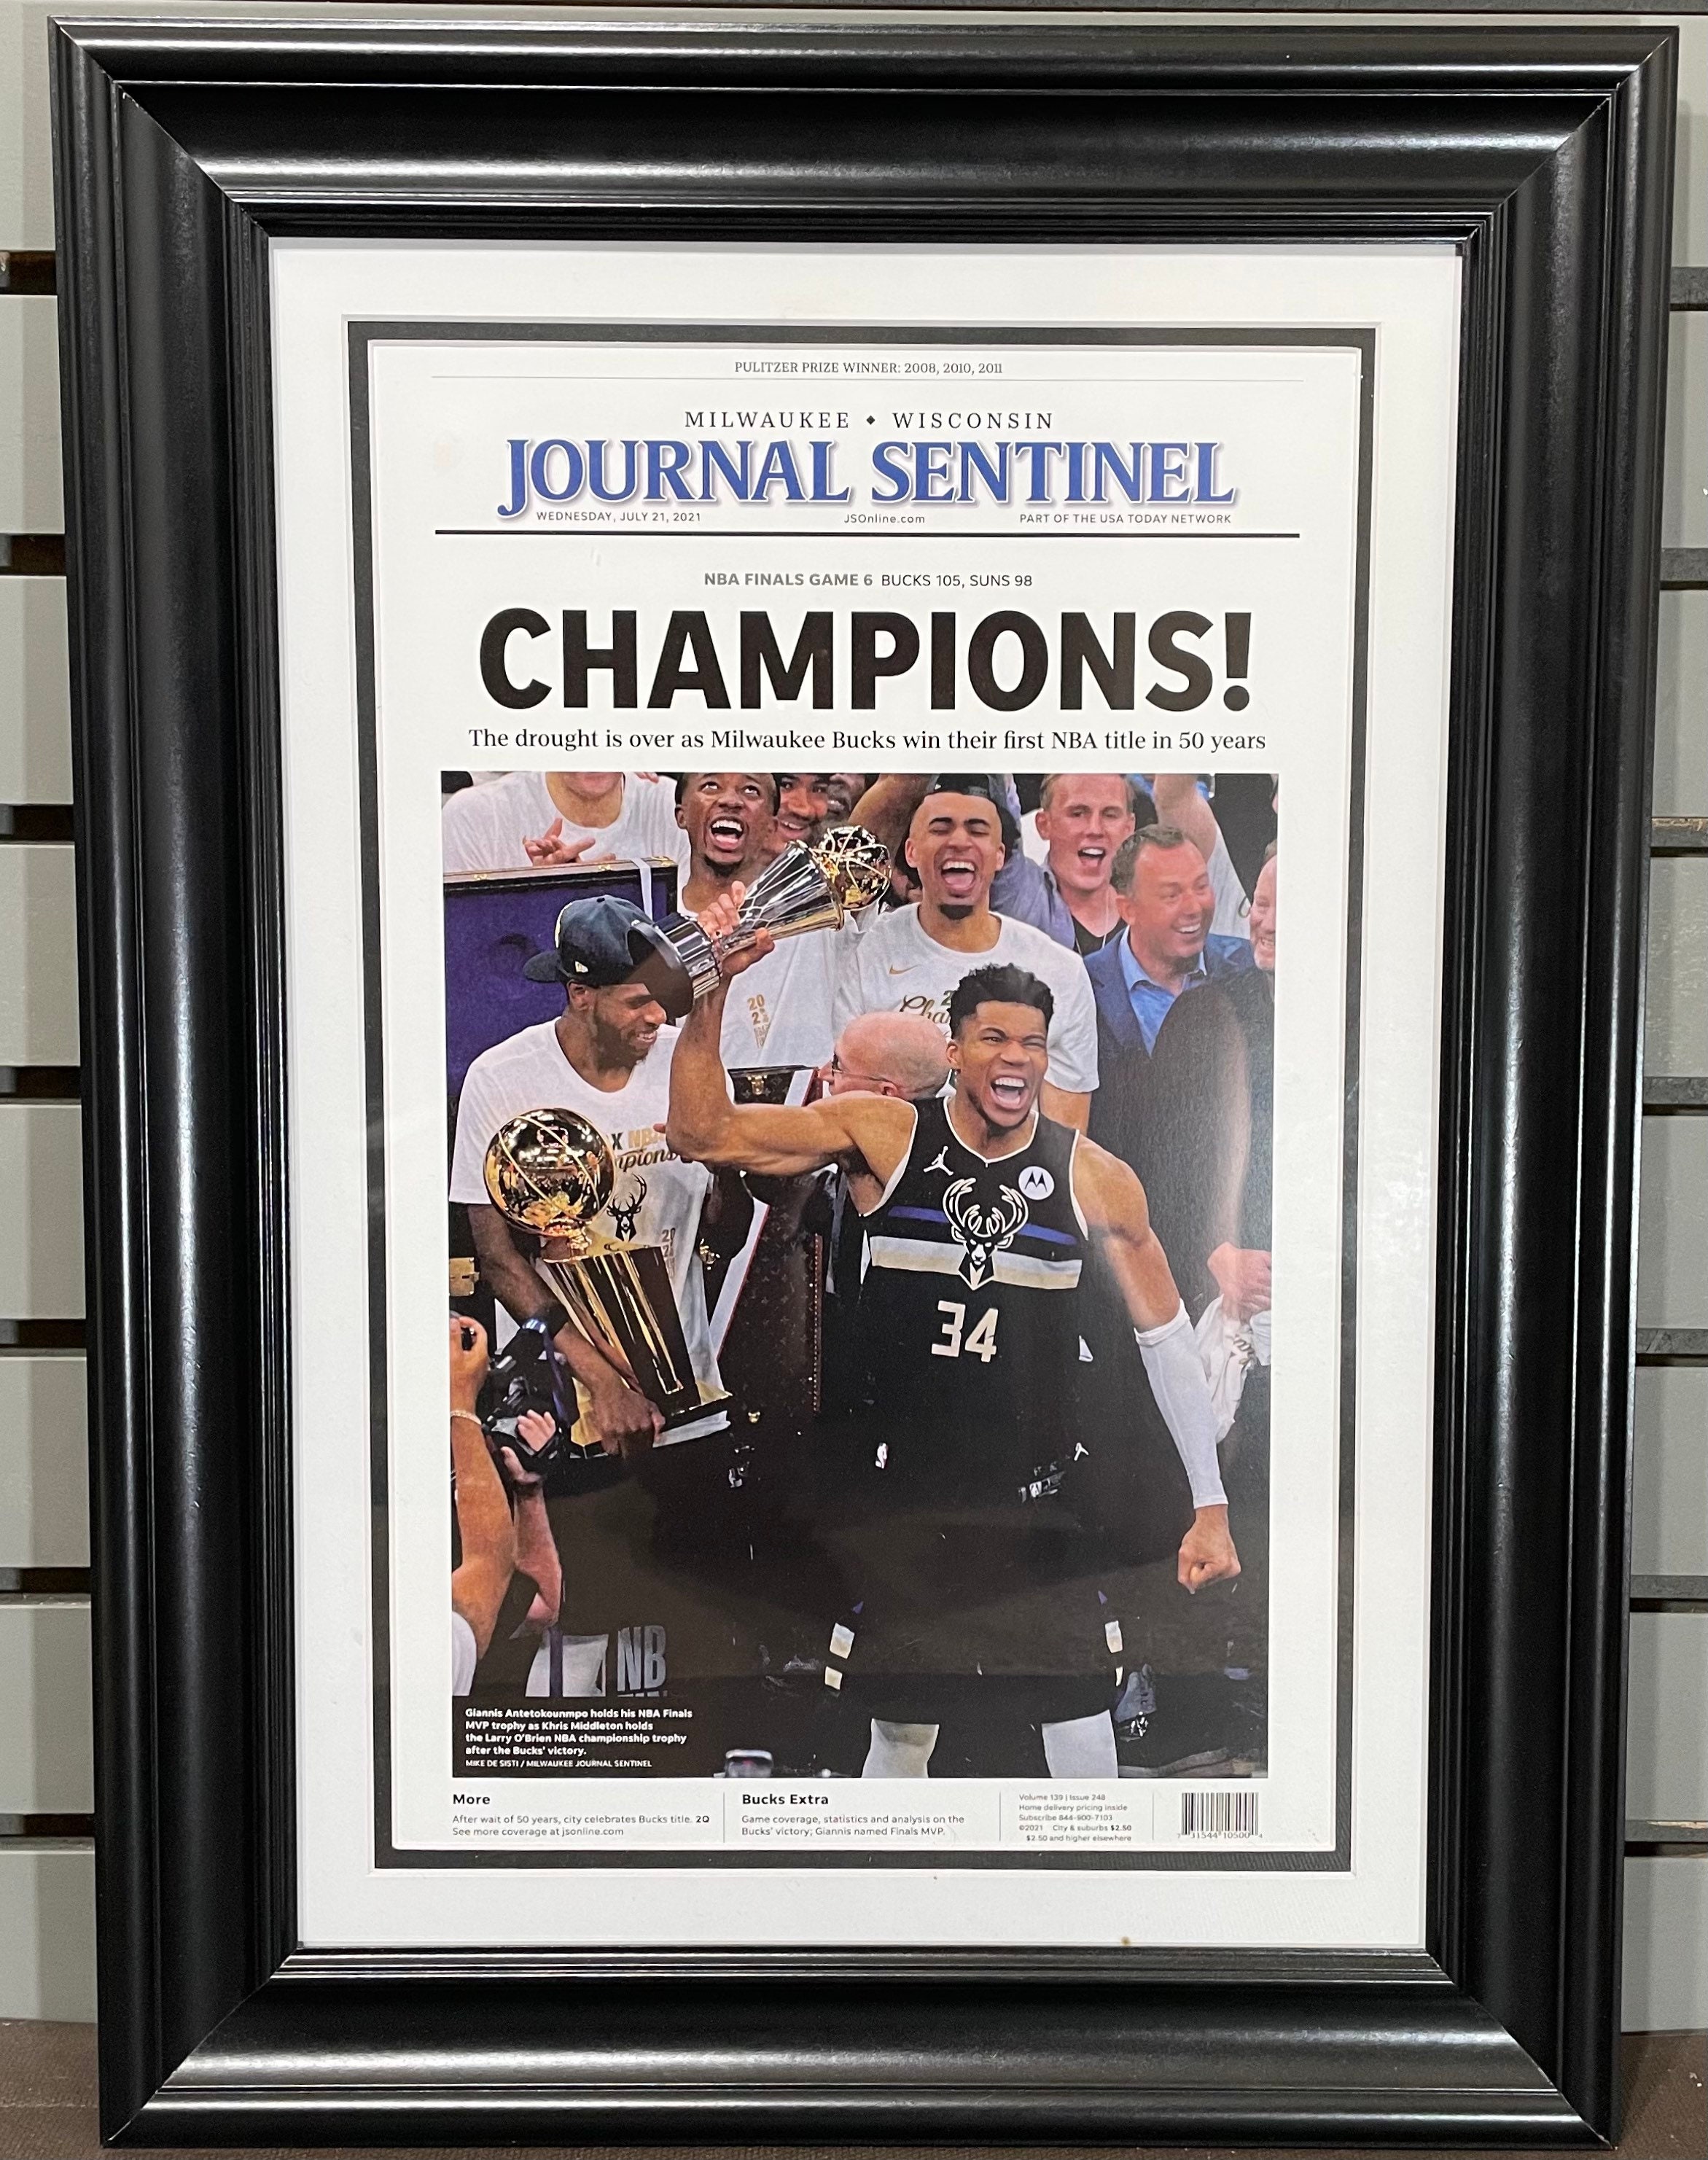 Join the auction for autographed Spurs memorabilia - Pounding The